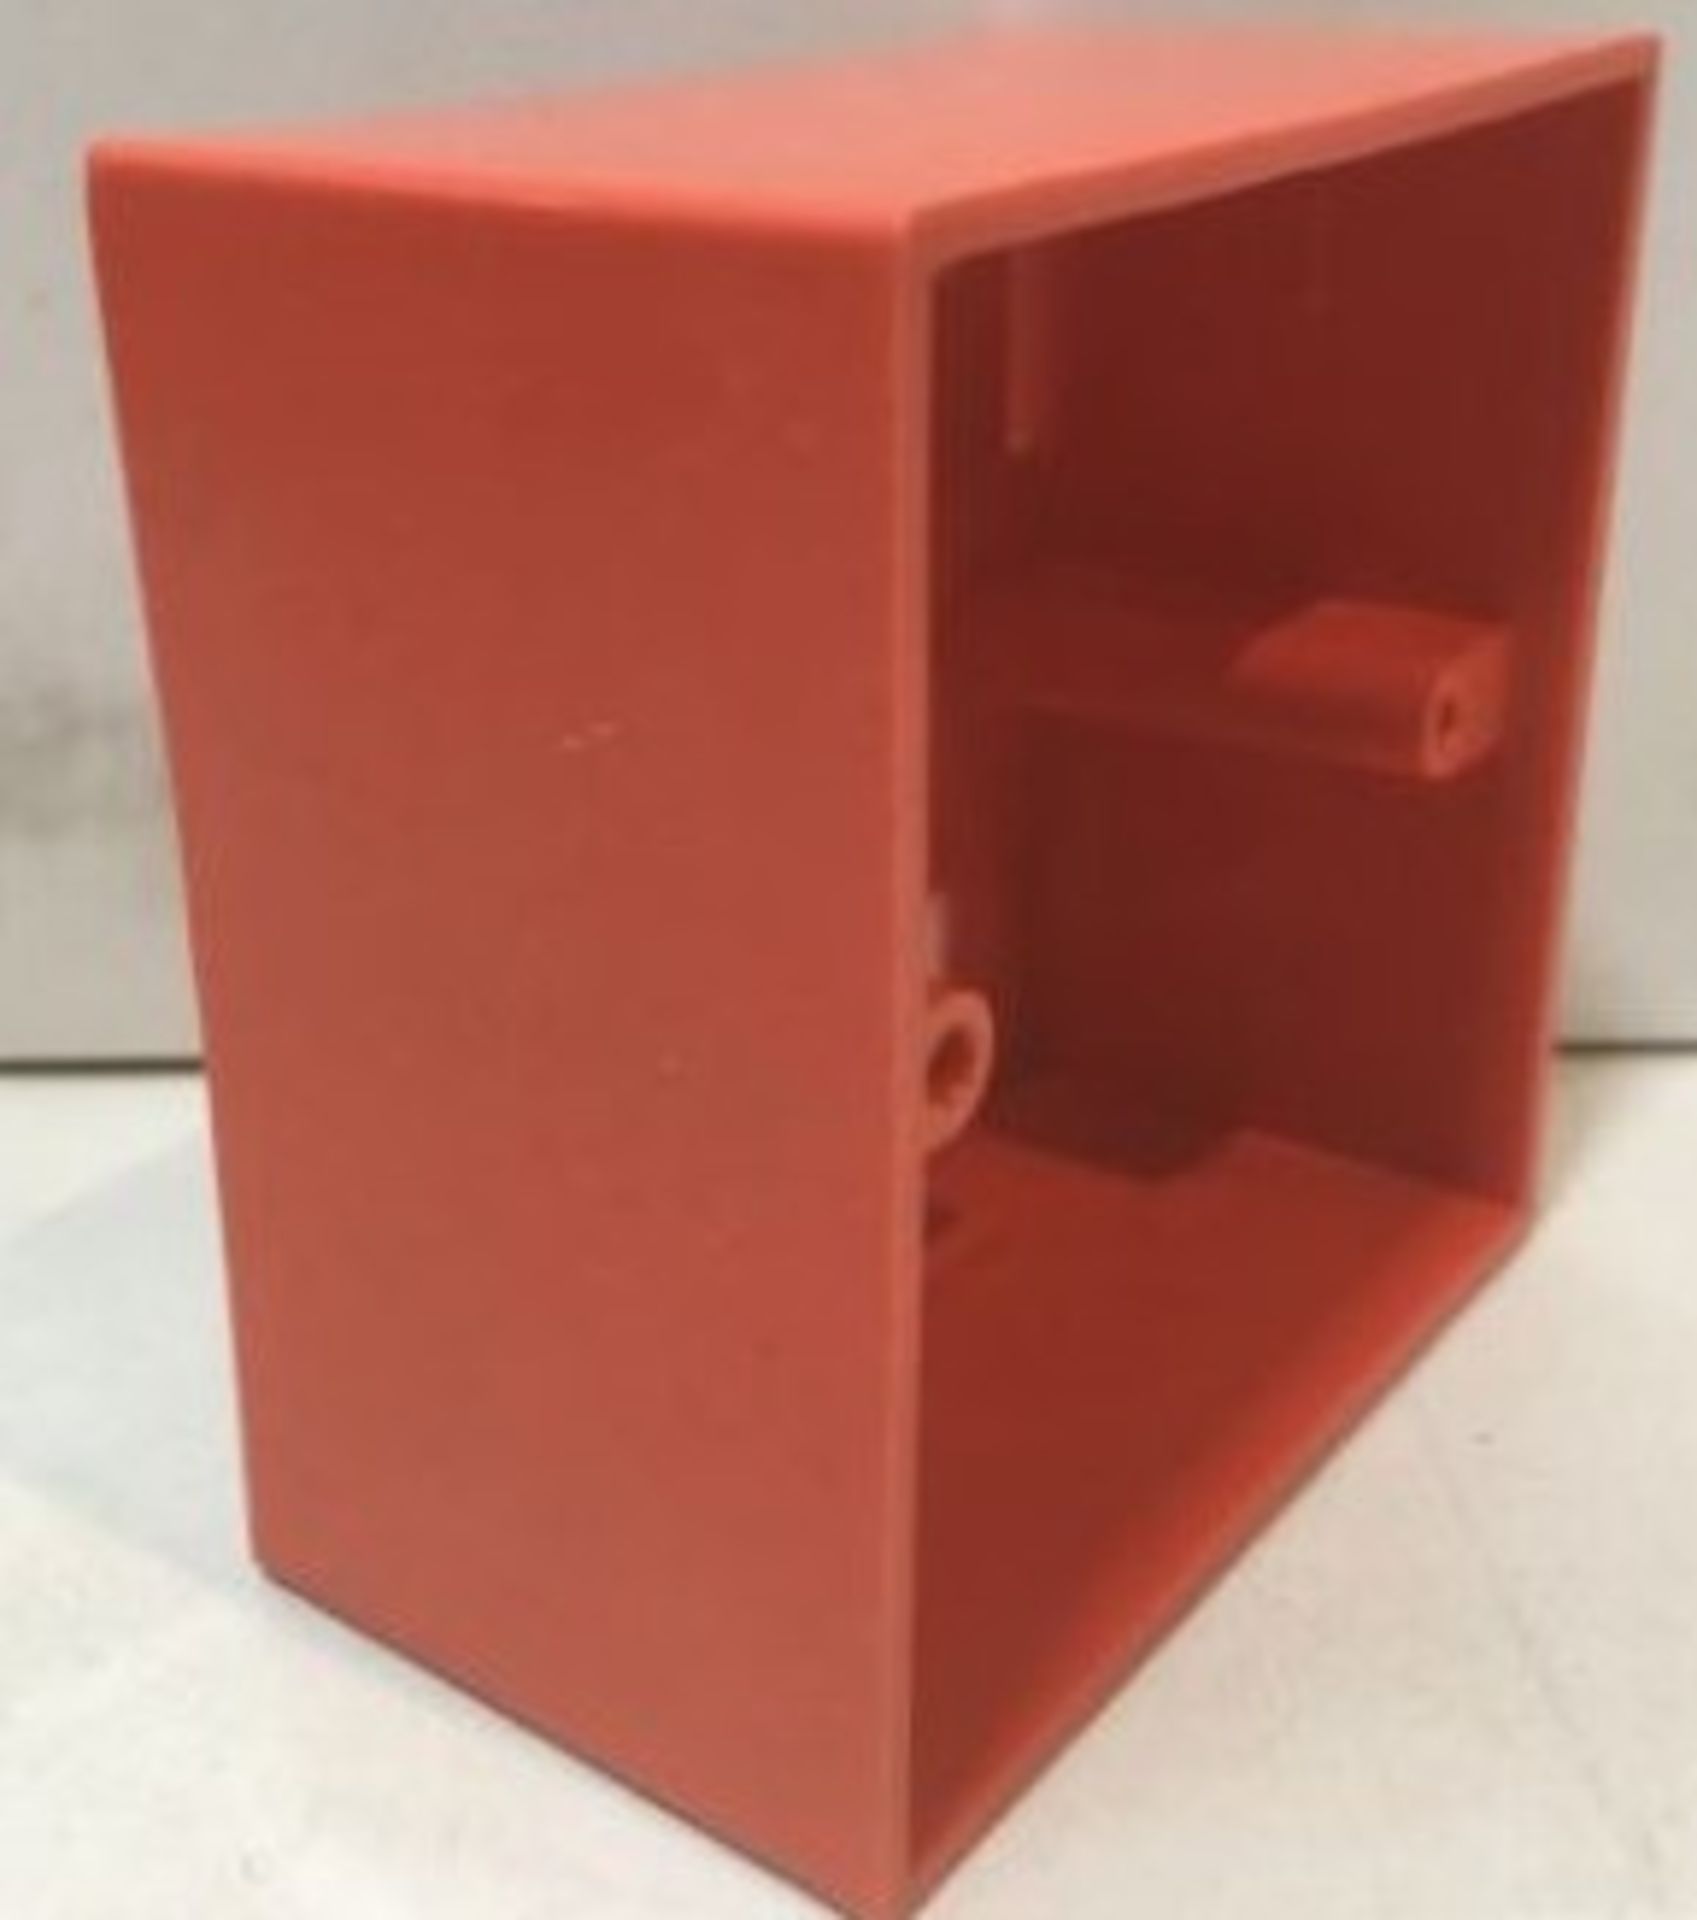 18 x Red Plastic Electrical Wall Boxes W/ 20 x Spacer Pieces - Image 4 of 4